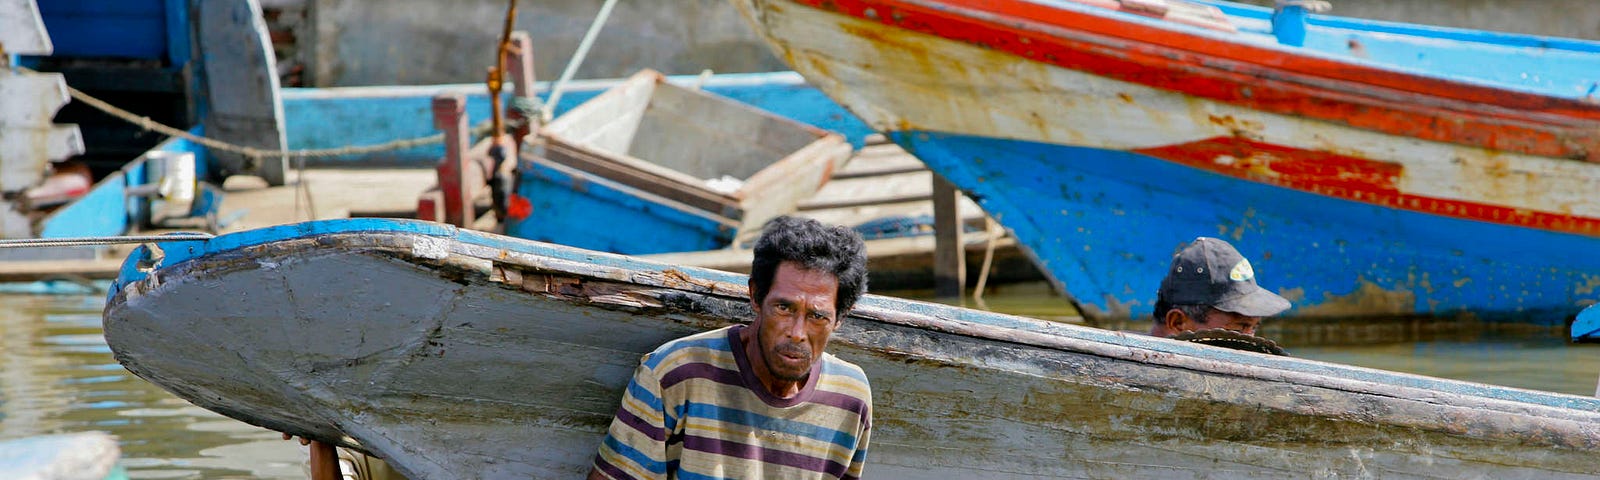 A man pulls a colourful fishing boat as he wades through the sea.